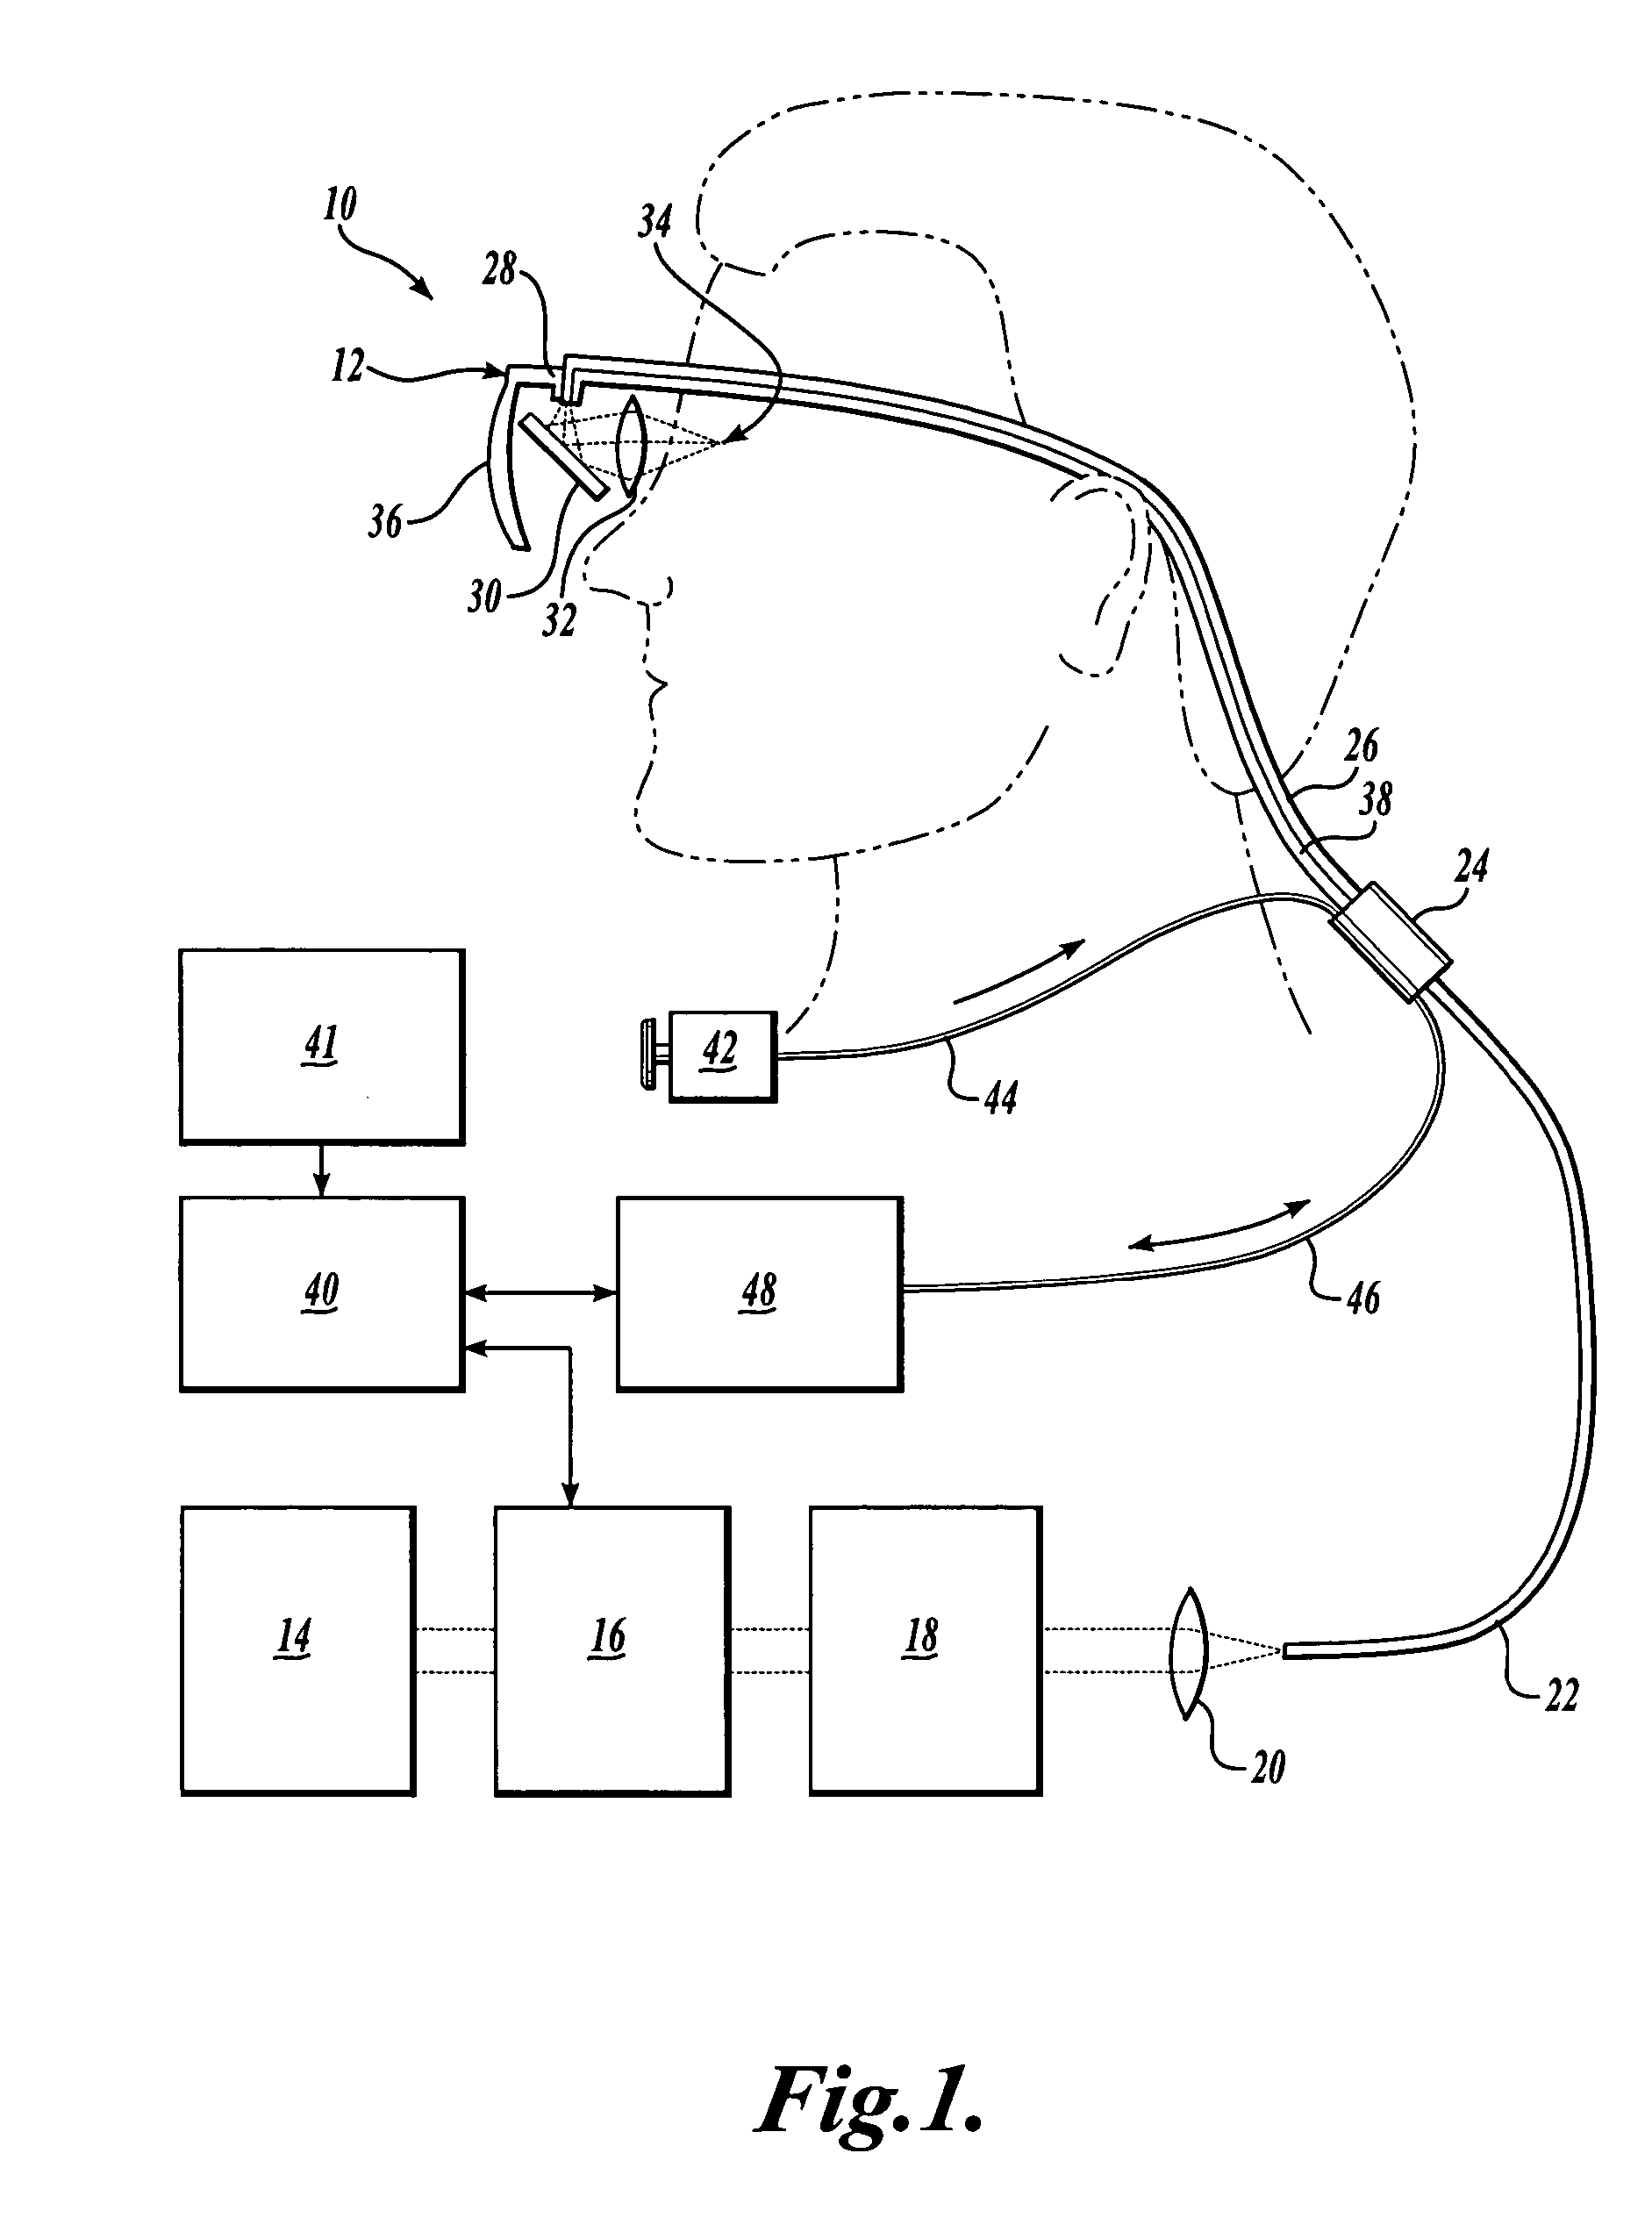 Scanning laser device and methods of use